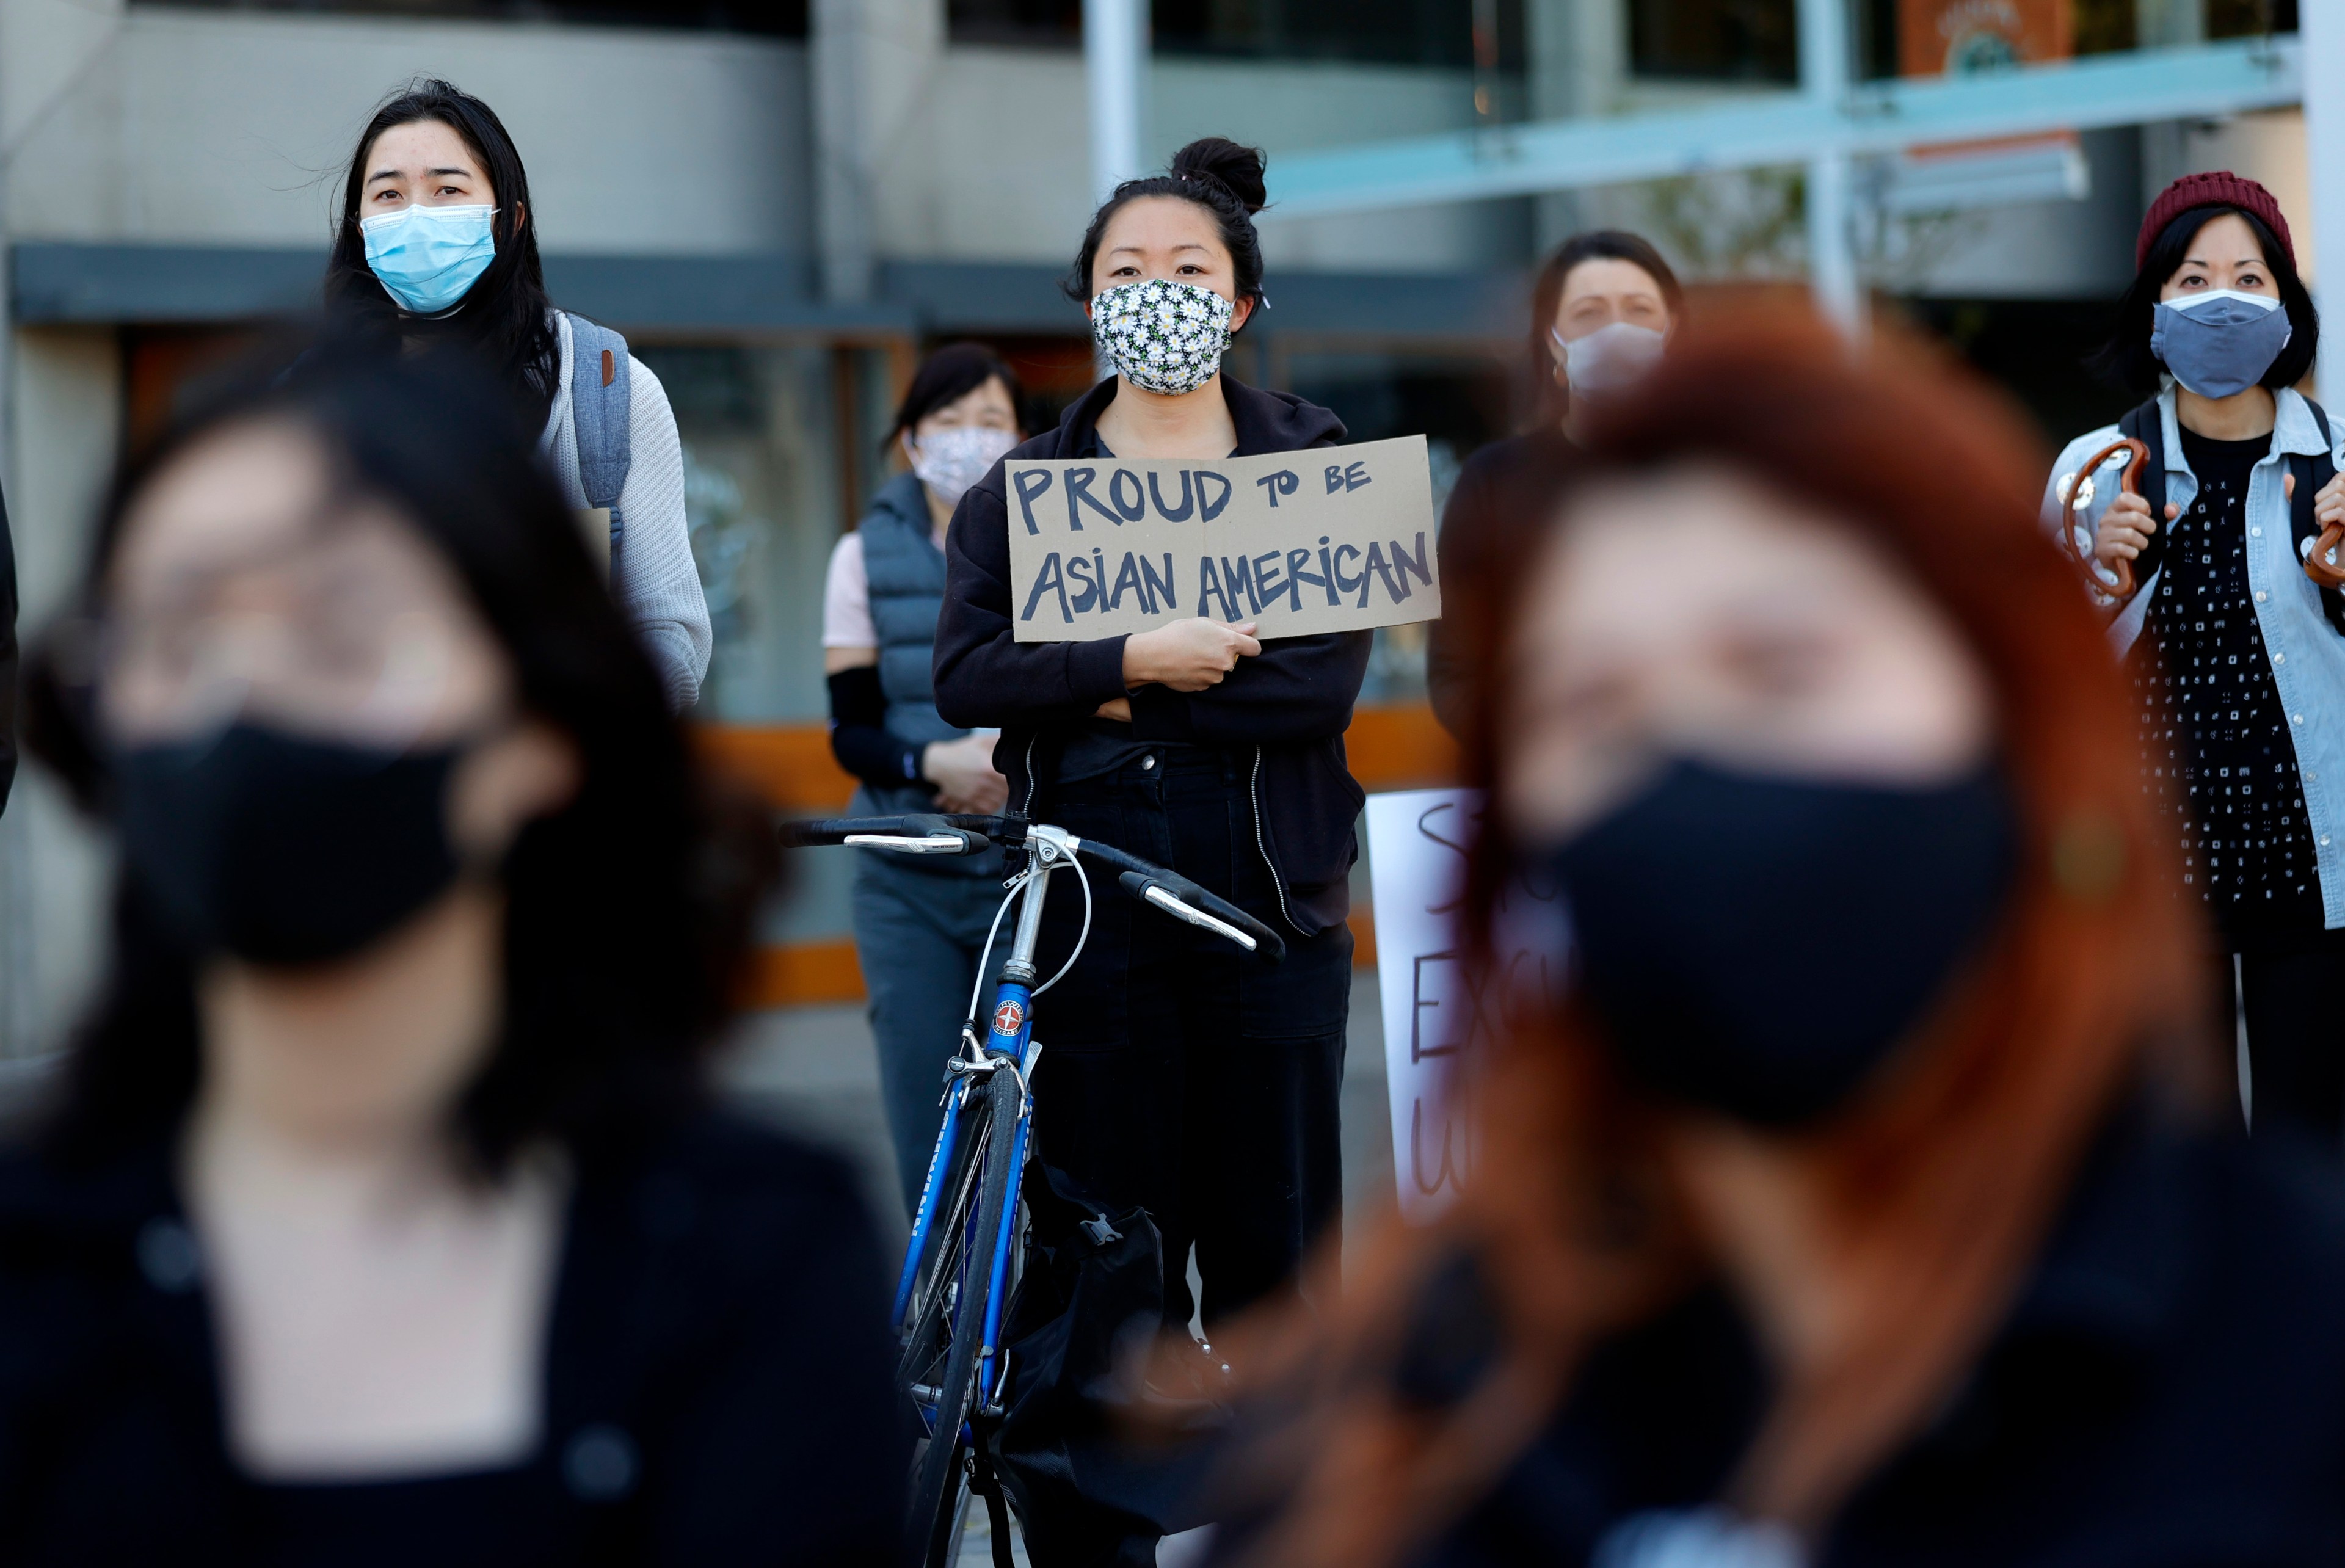 People in masks, one holding a &quot;PROUD TO BE ASIAN AMERICAN&quot; sign, seemingly at a gathering or protest.